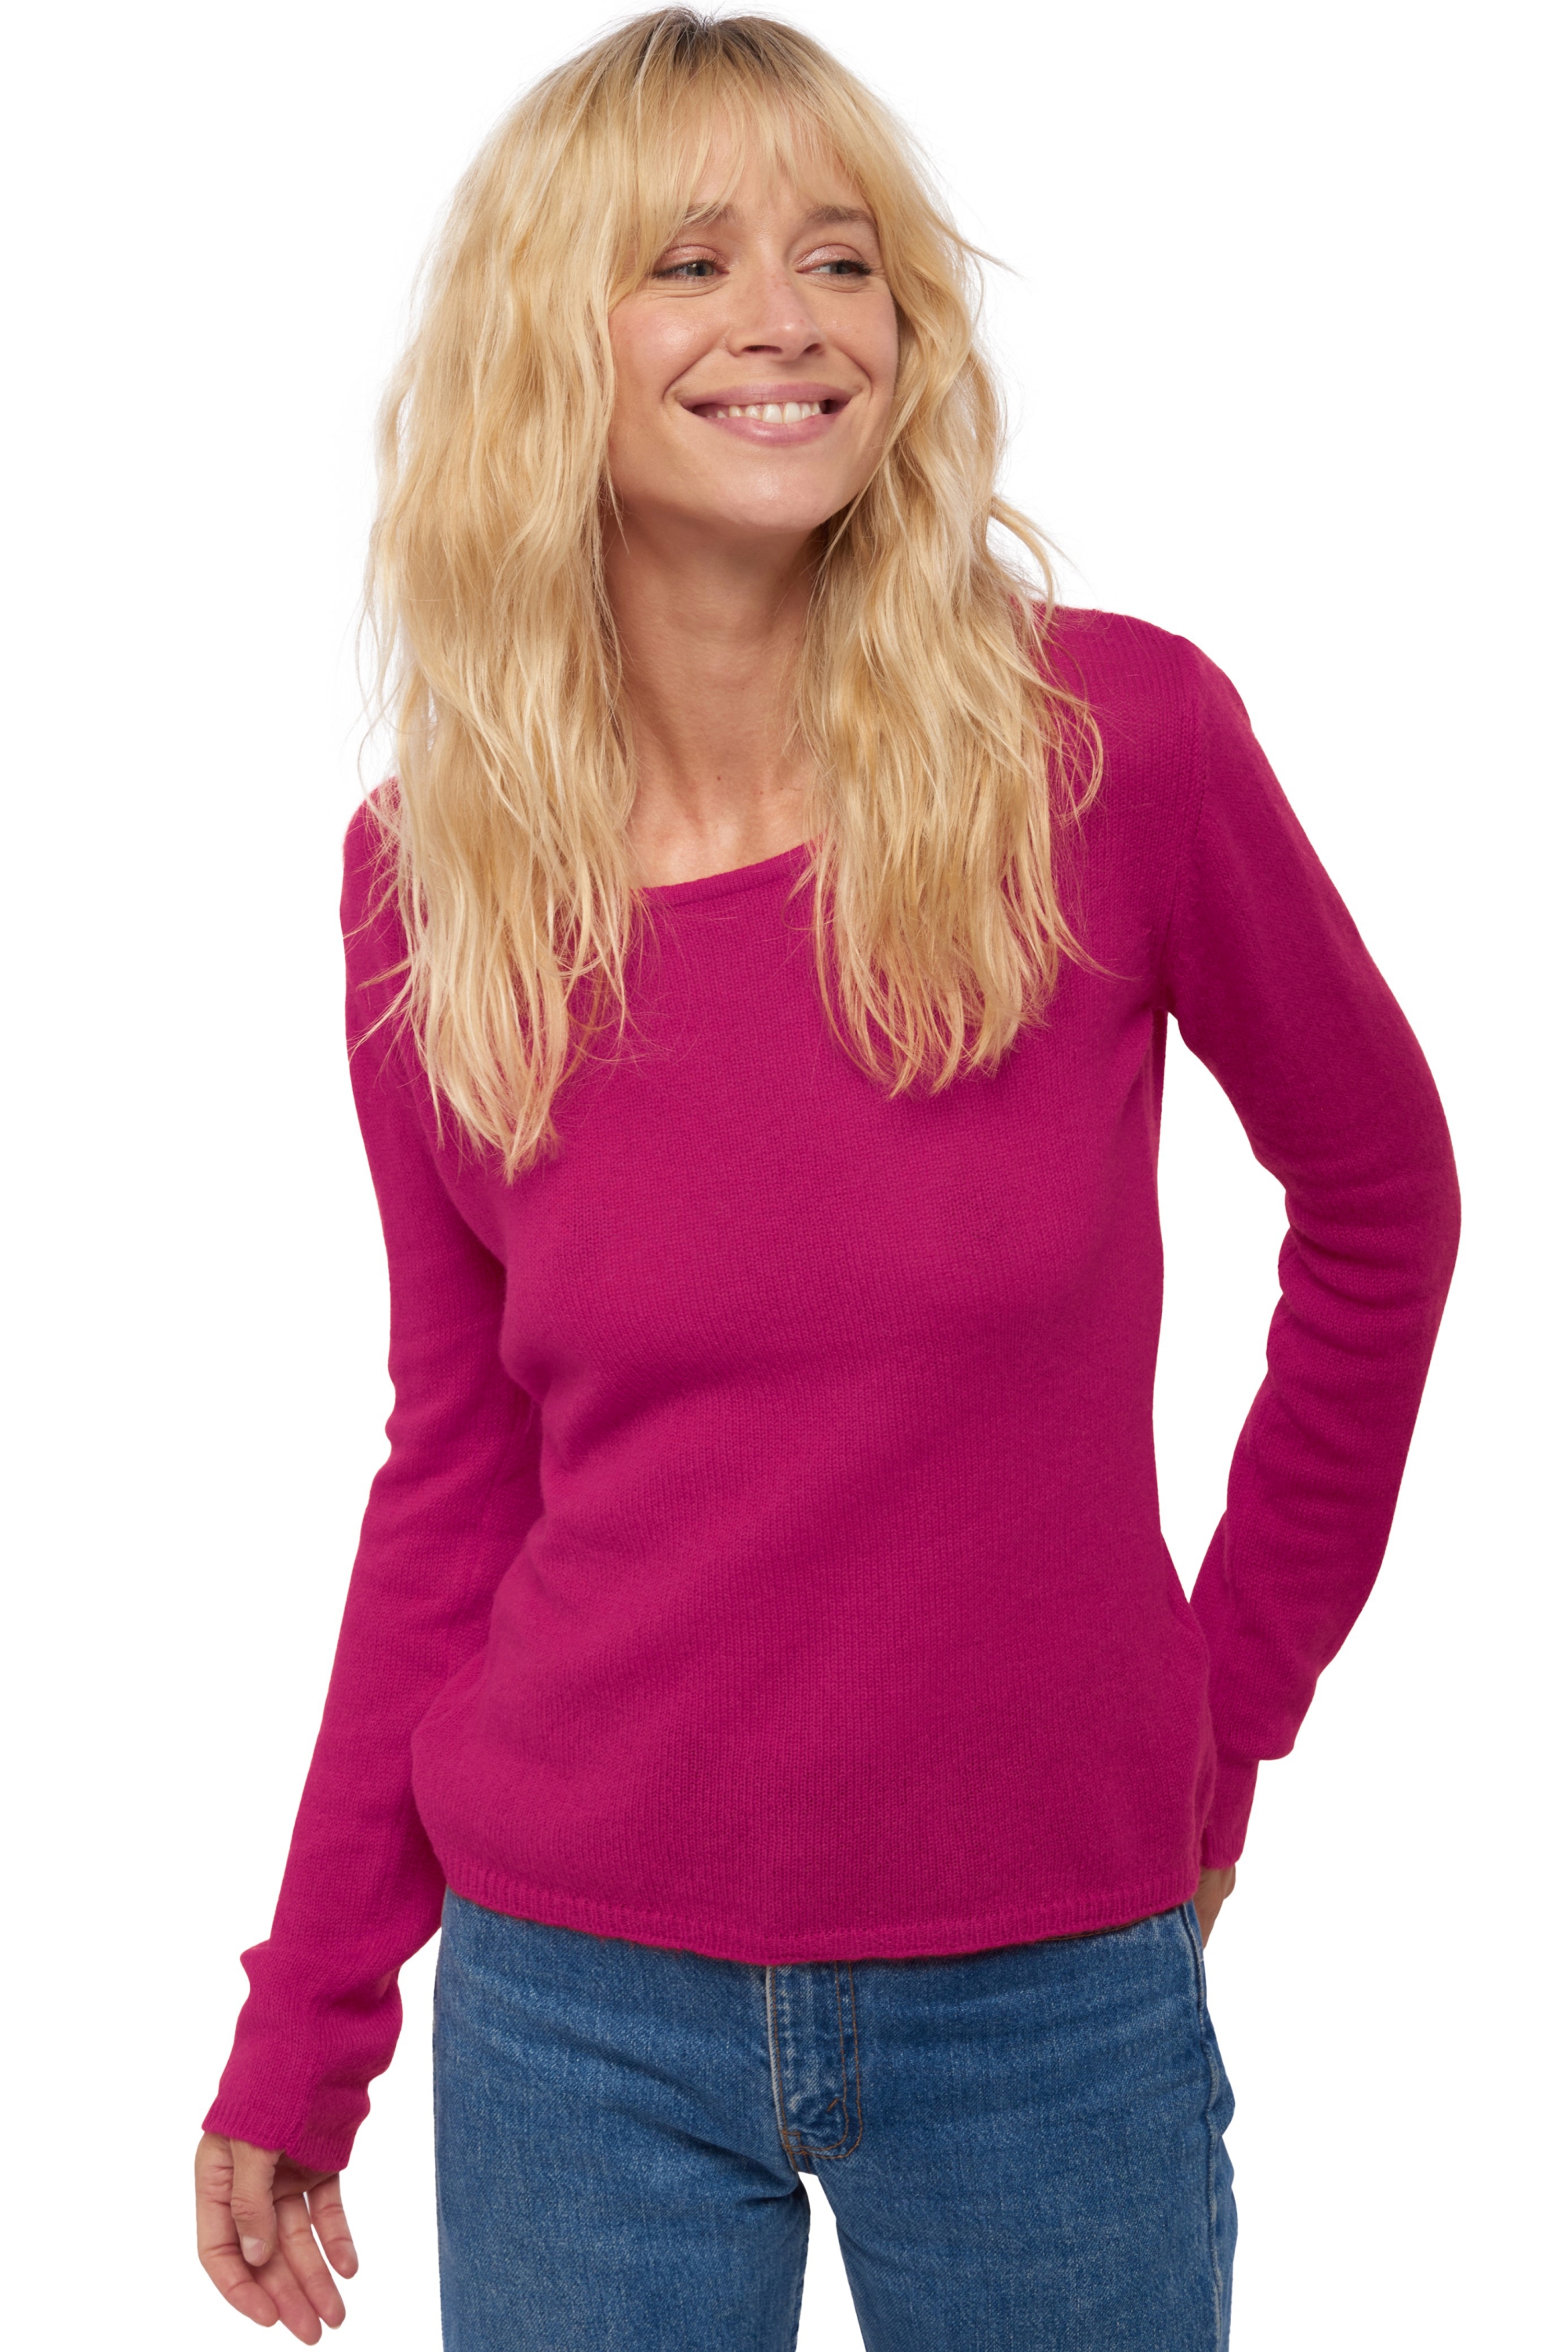 Cashmere ladies basic sweaters at low prices caleen radiance s